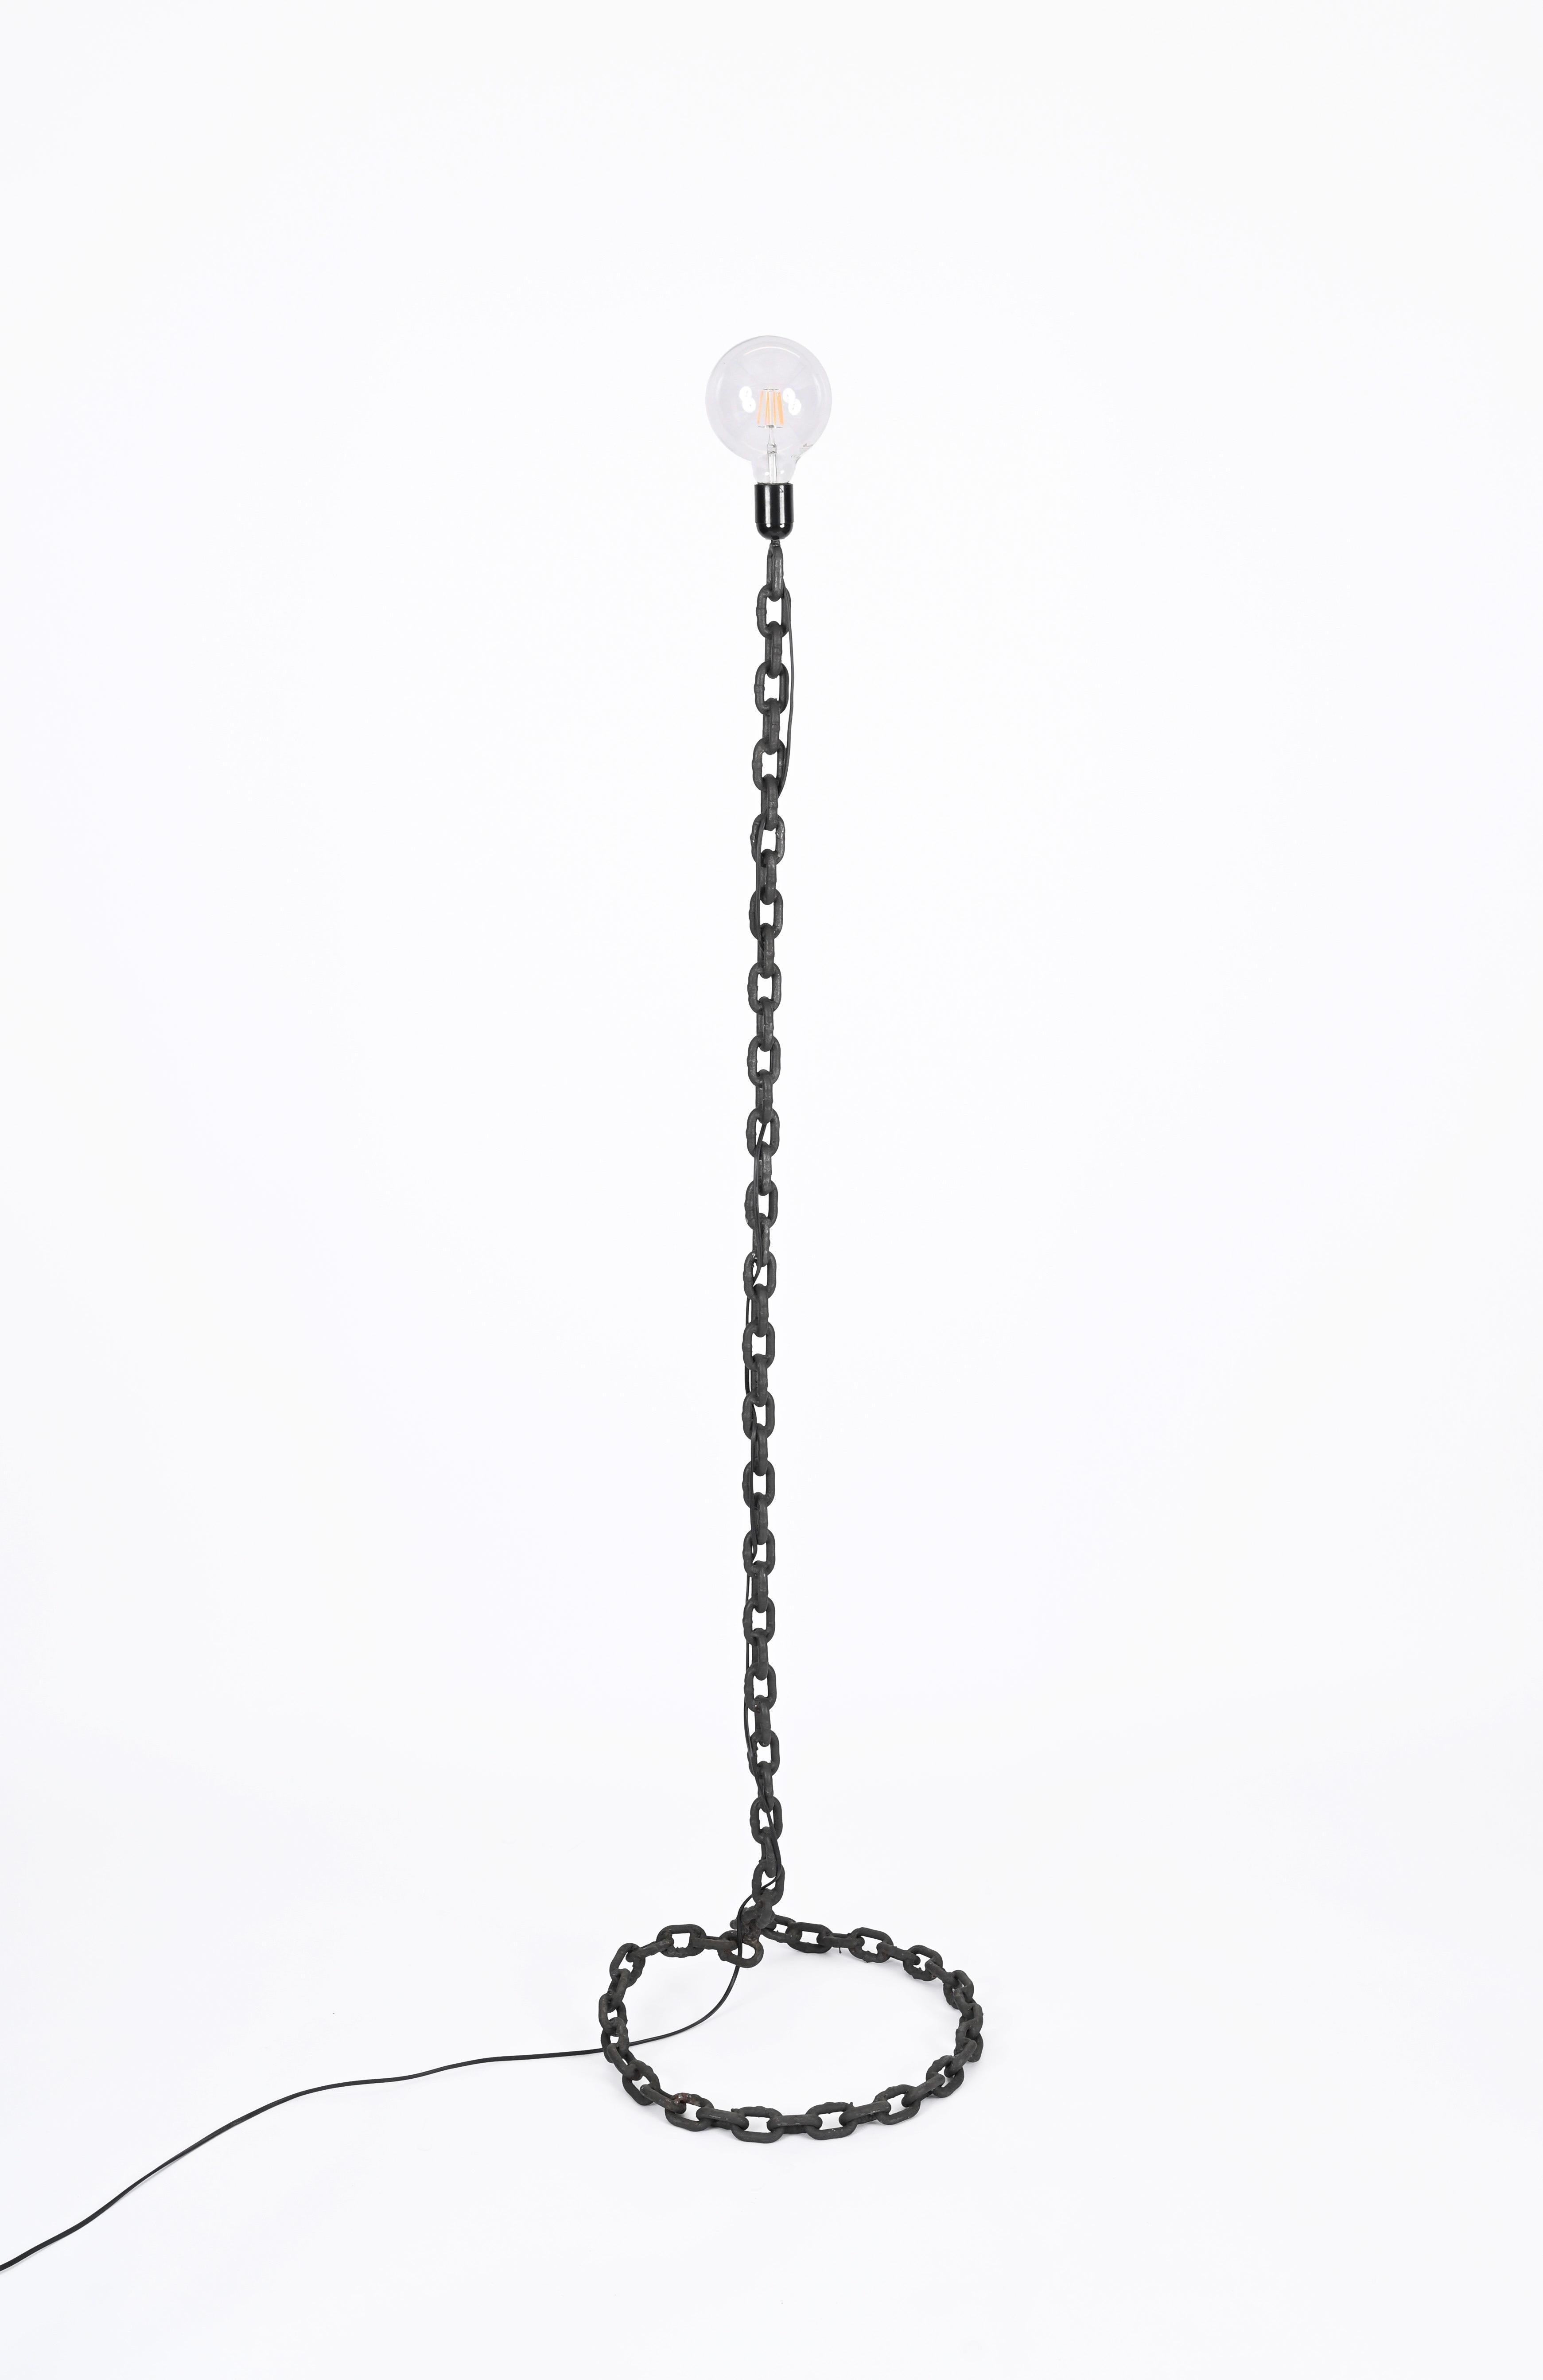 Franz West Brutalist Midcentury Chain Floor Lamp, Italy 1970s  For Sale 4